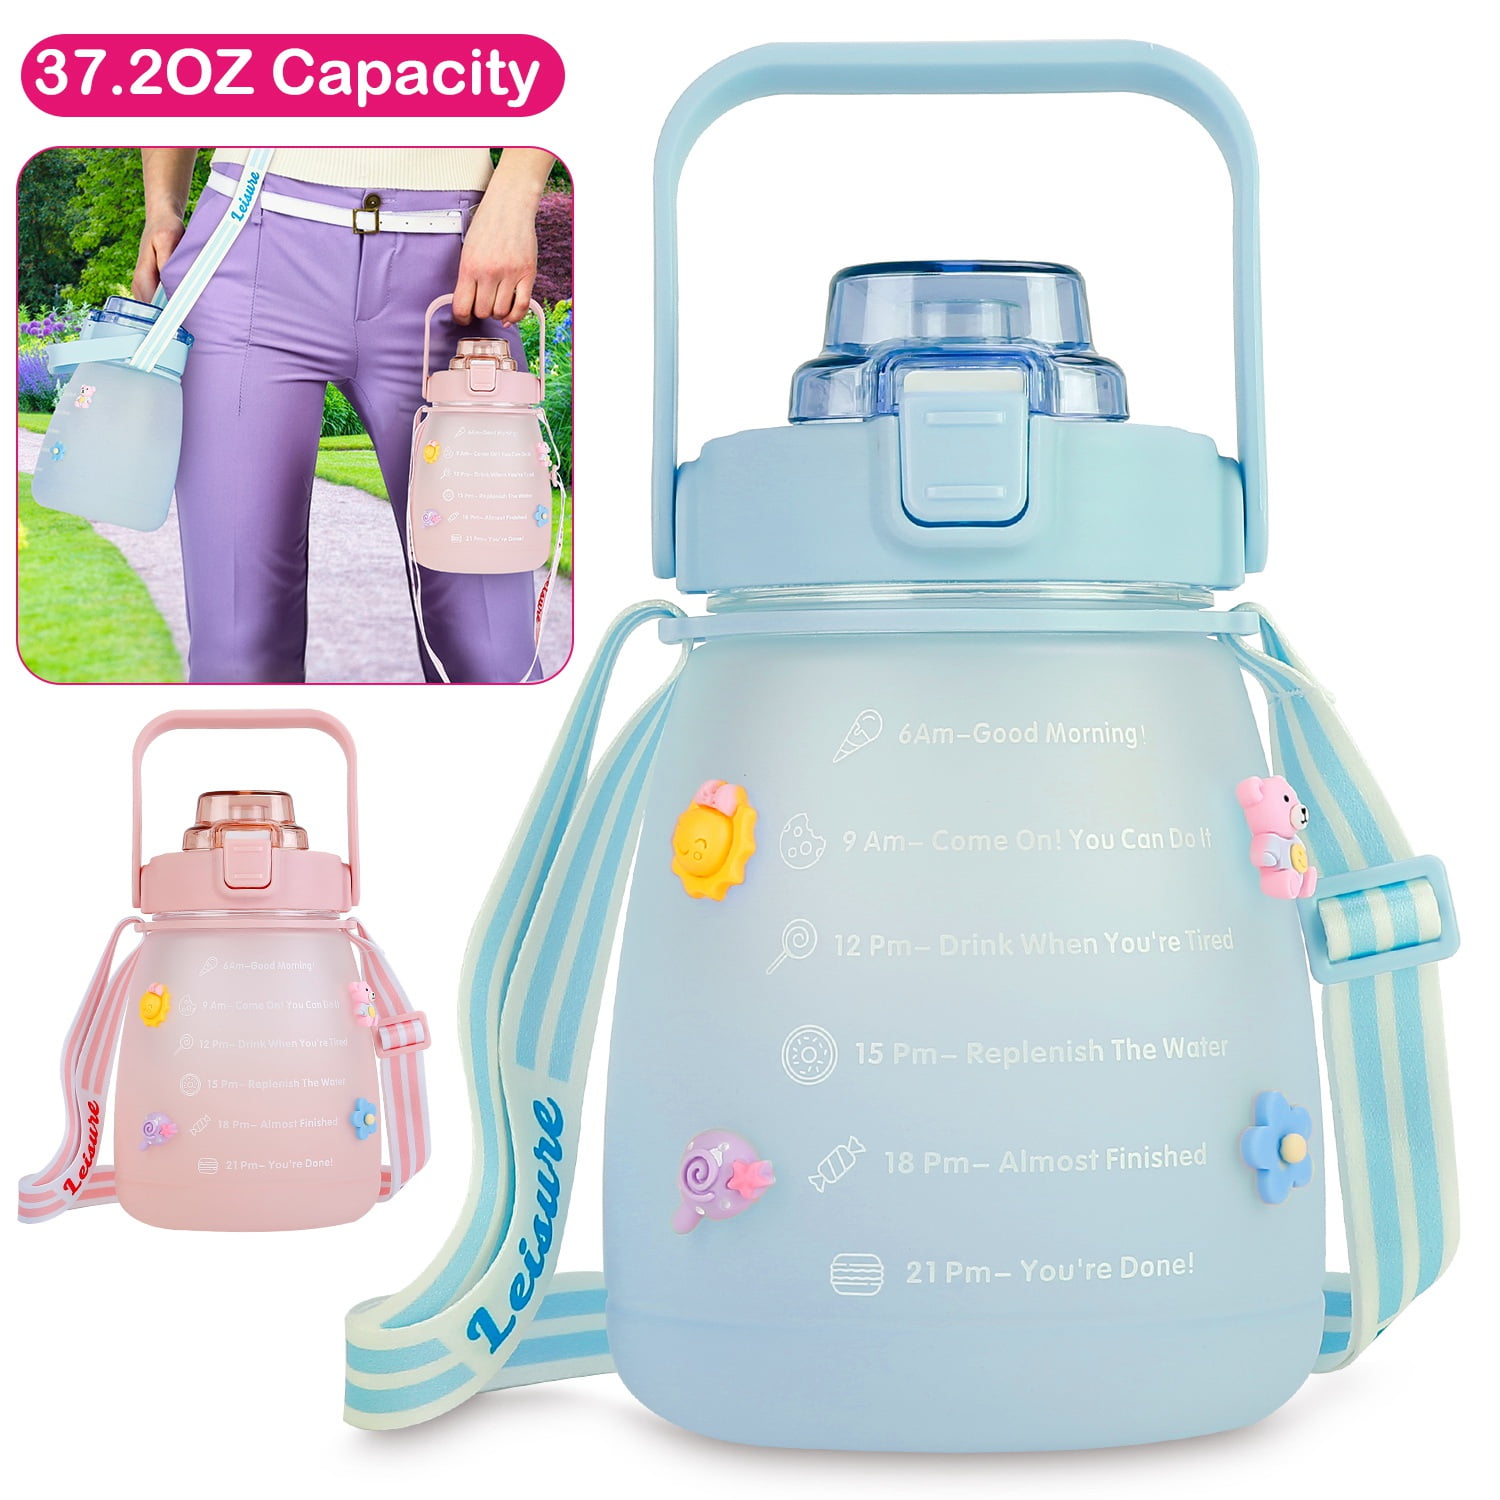 Hydration on the Go: Mollcity Small Water Bottles for Kids Stay Refreshed,  Stay Cool!, by iohhjghjhj